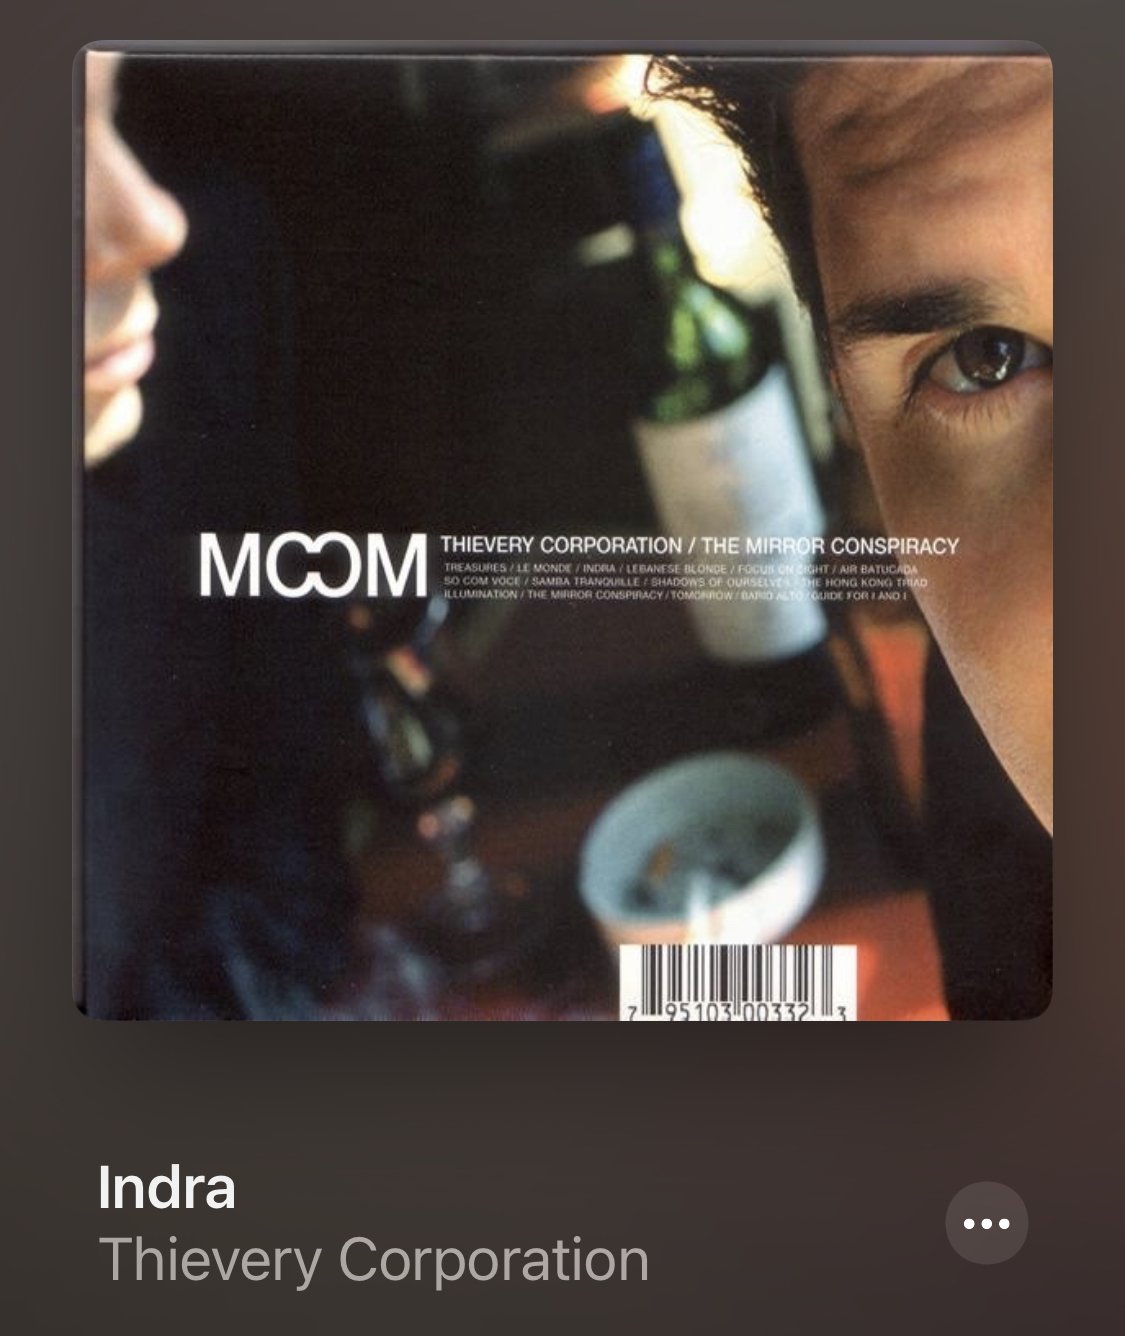  Another great track by Thievery Corporation. I first listened to “Indra” while watching Vanilla Sky, which if you are a true Nolie, you know was a major inspiration for my move to NYC.   